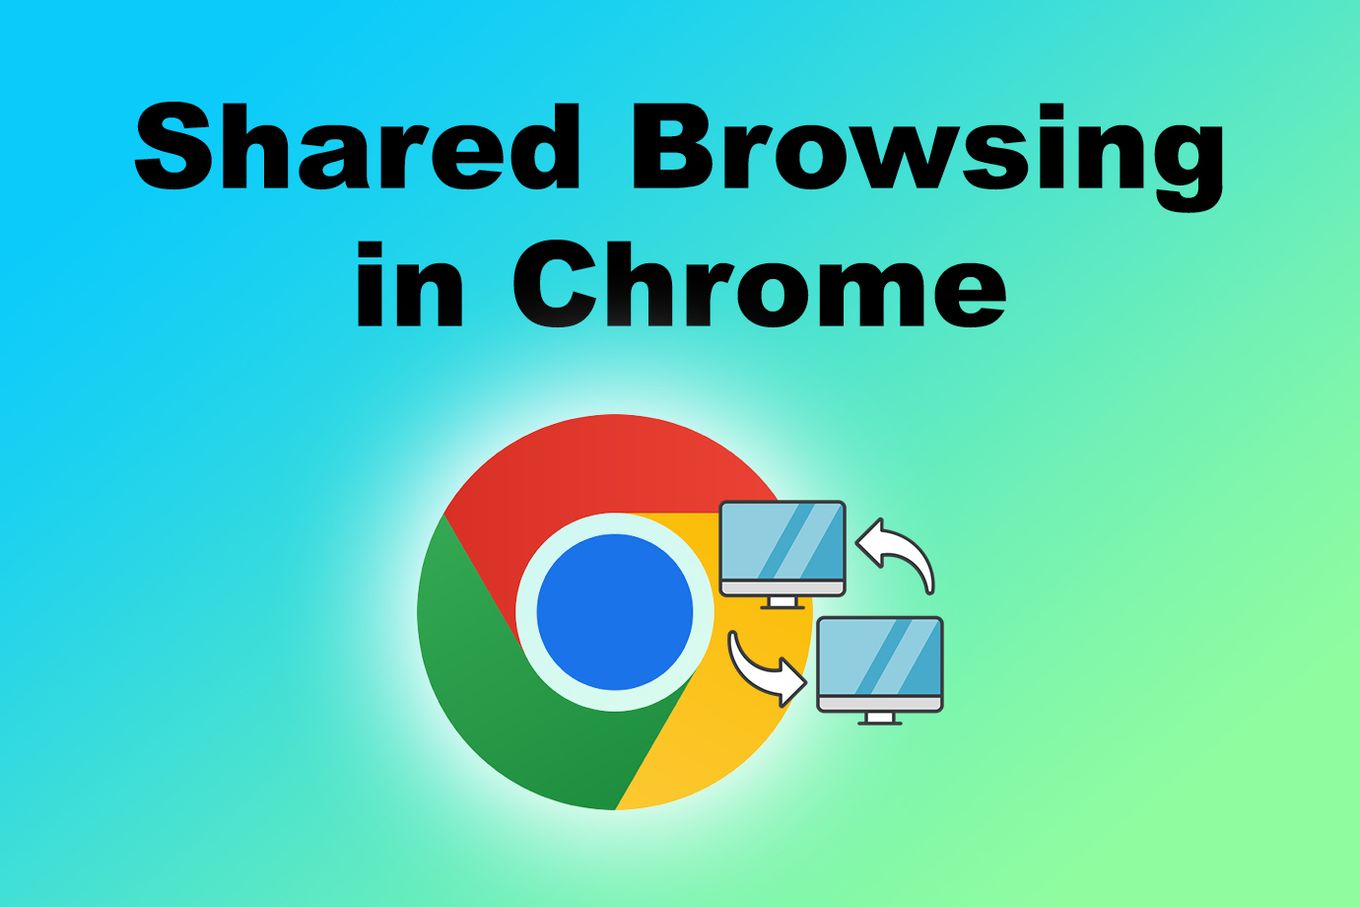 Shared Browsing in Chrome